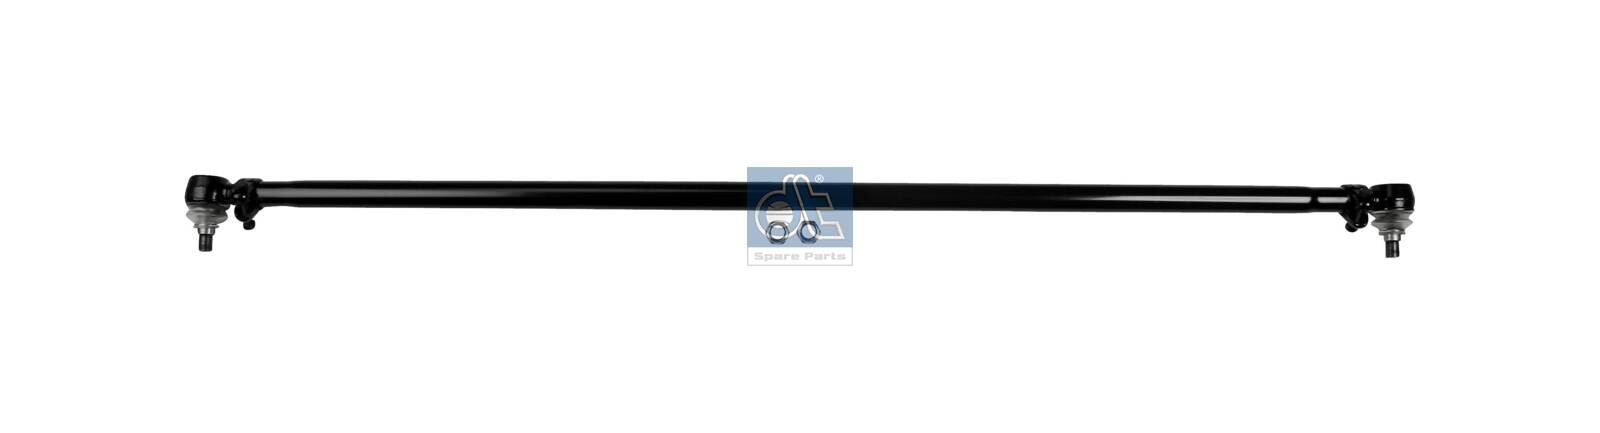 DT Spare Parts 4.64591 Rod Assembly A970 330 0203